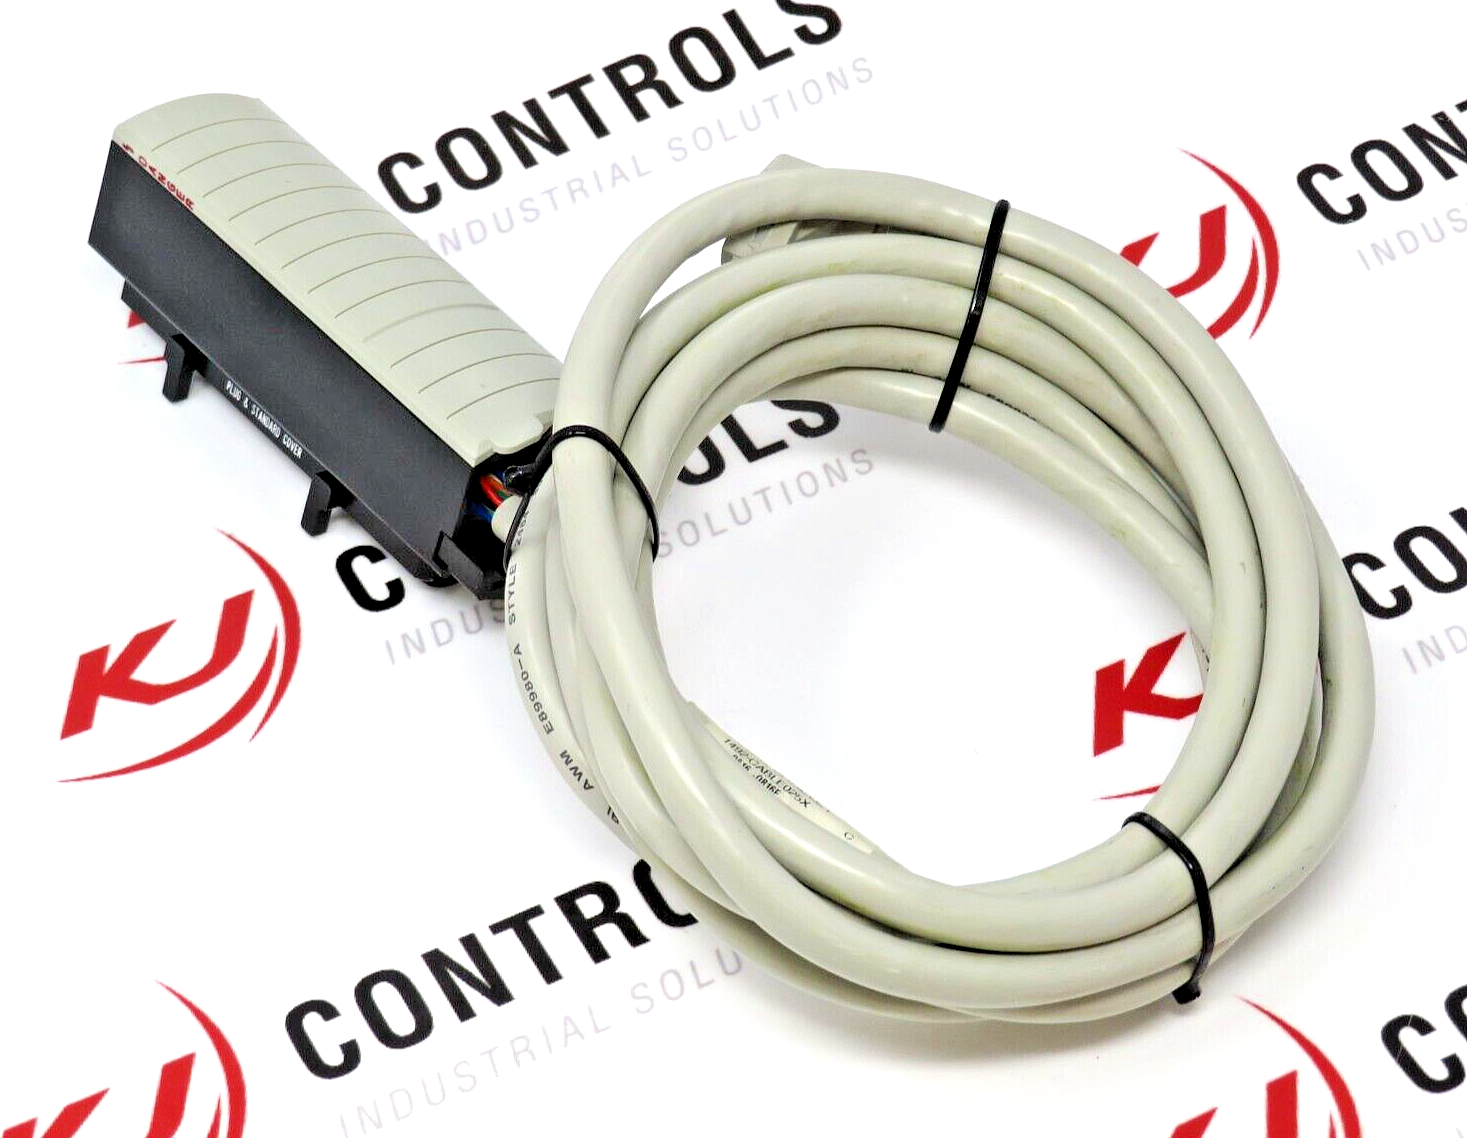 Allen-Bradley 1492-CABLE025X Pre-wired 2.5 M 8.2 FT Digital Connection Cable